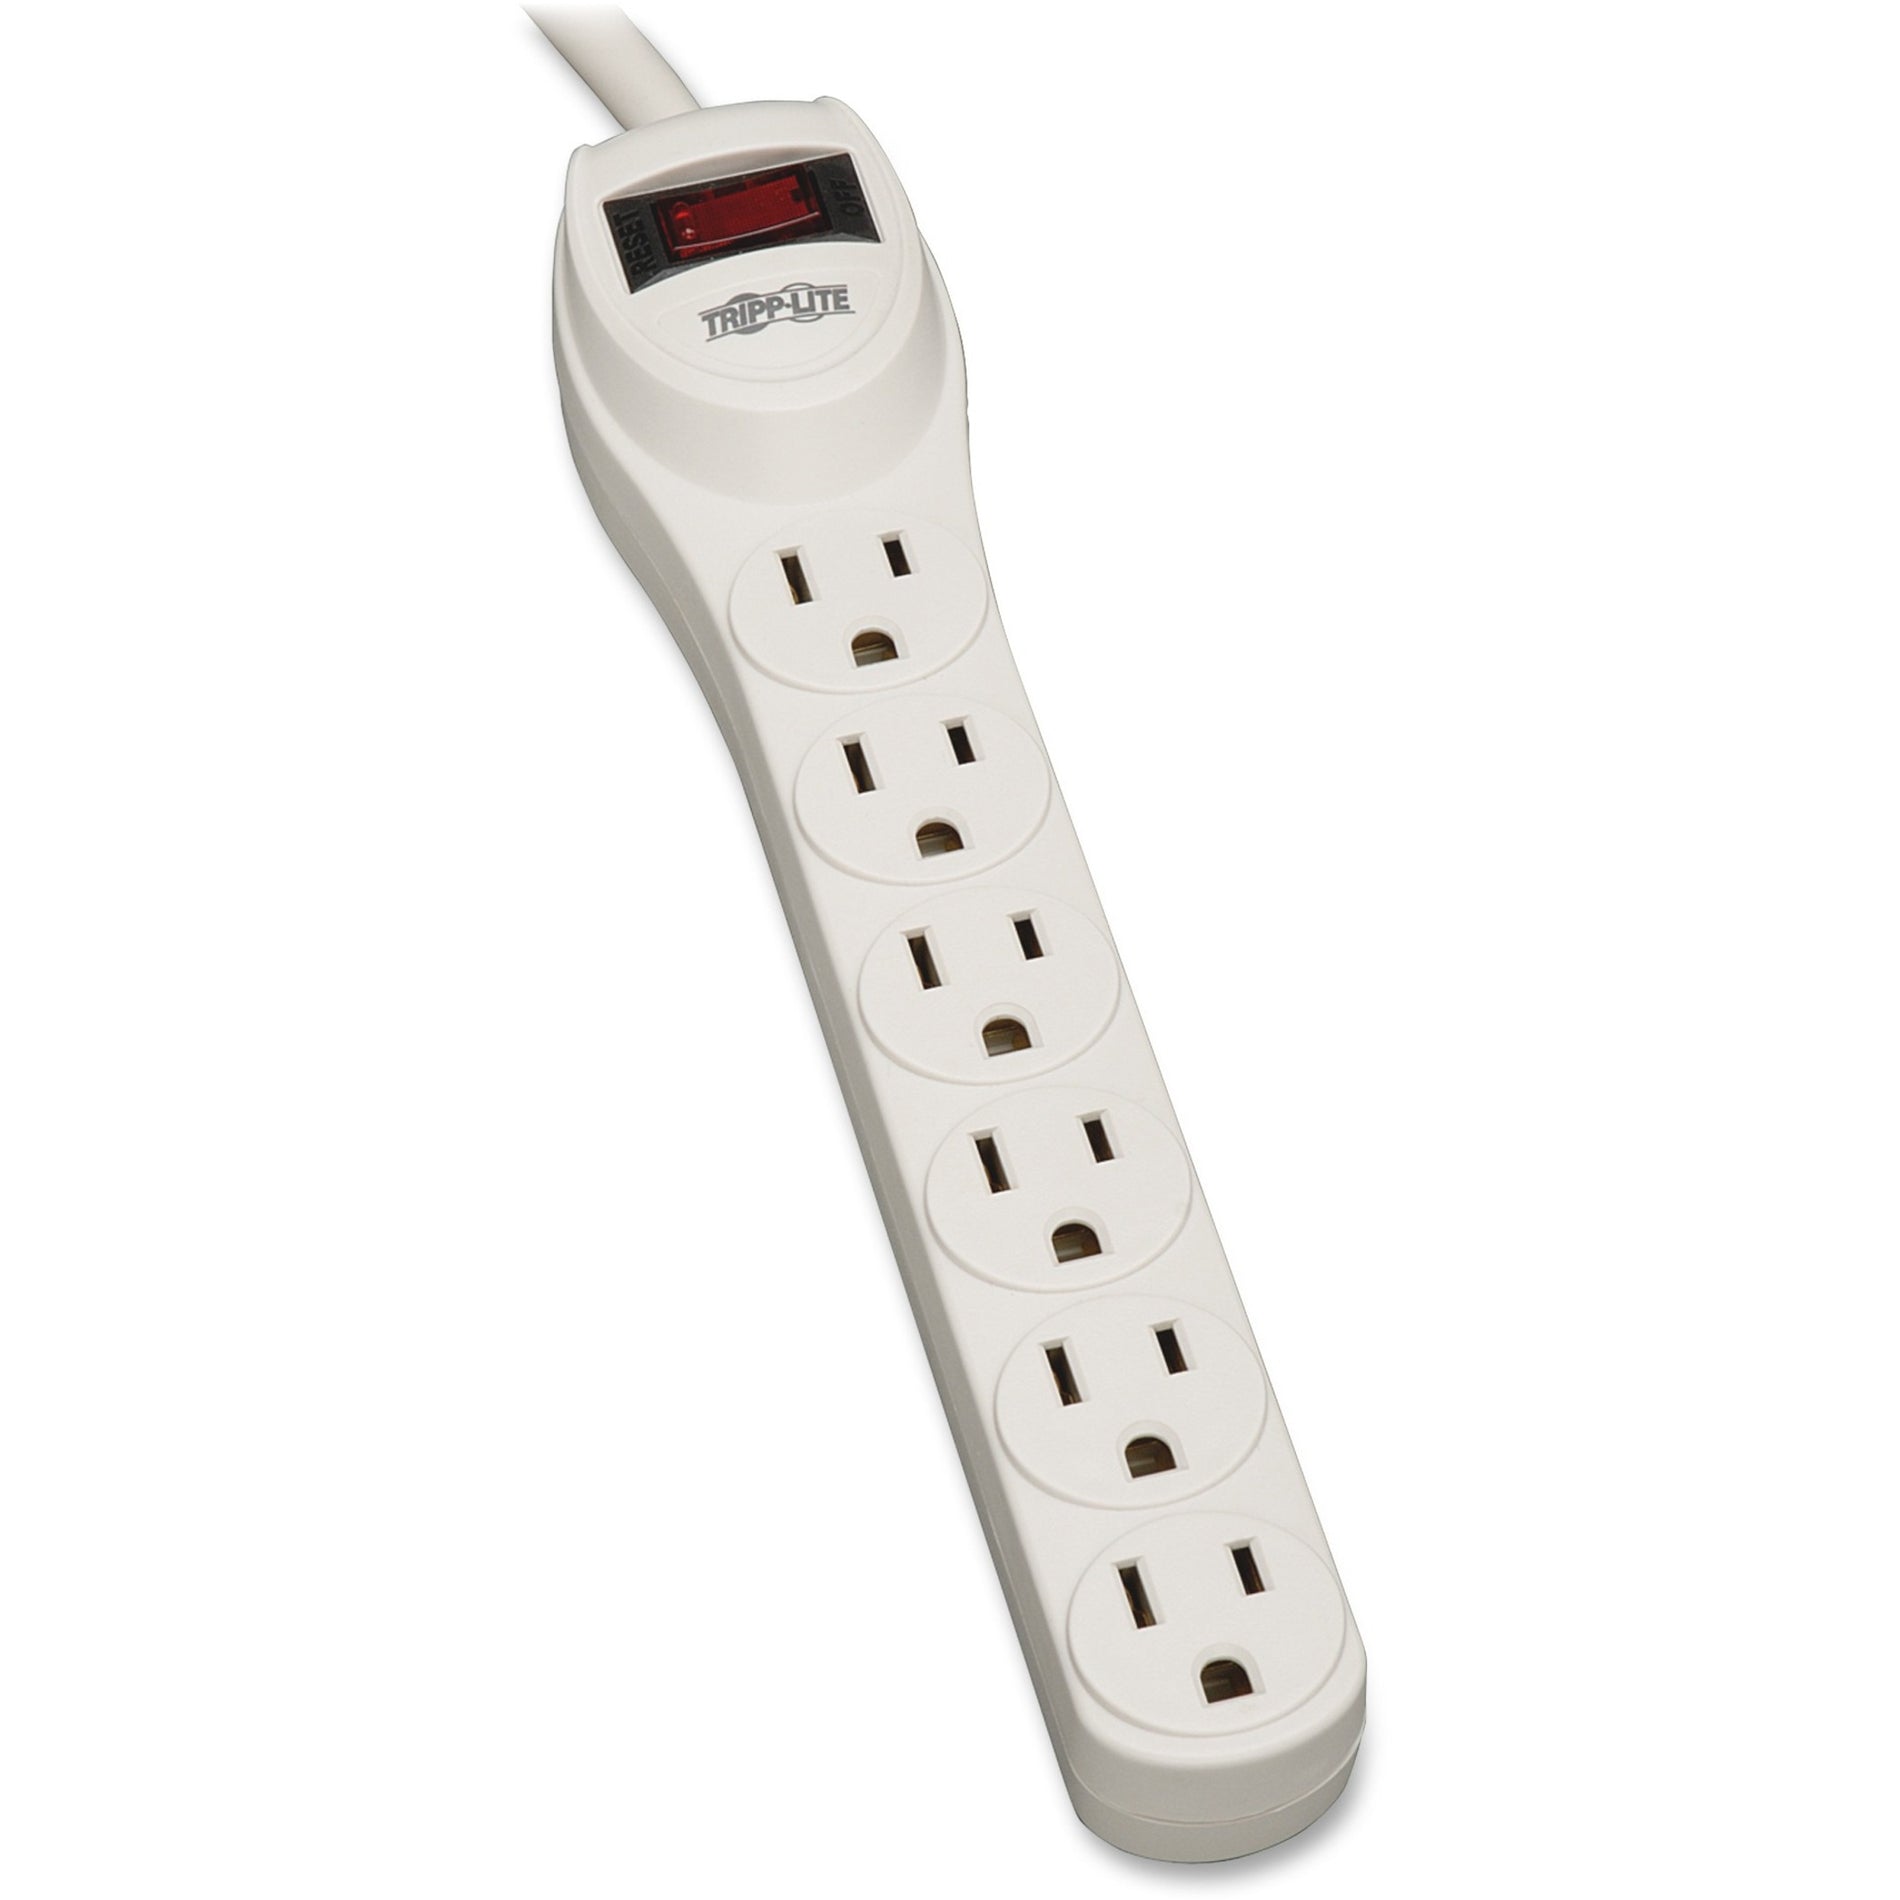 Tripp Lite TLP602 6-Outlet Economy Surge Protector, 180 Joules, 2' Cord